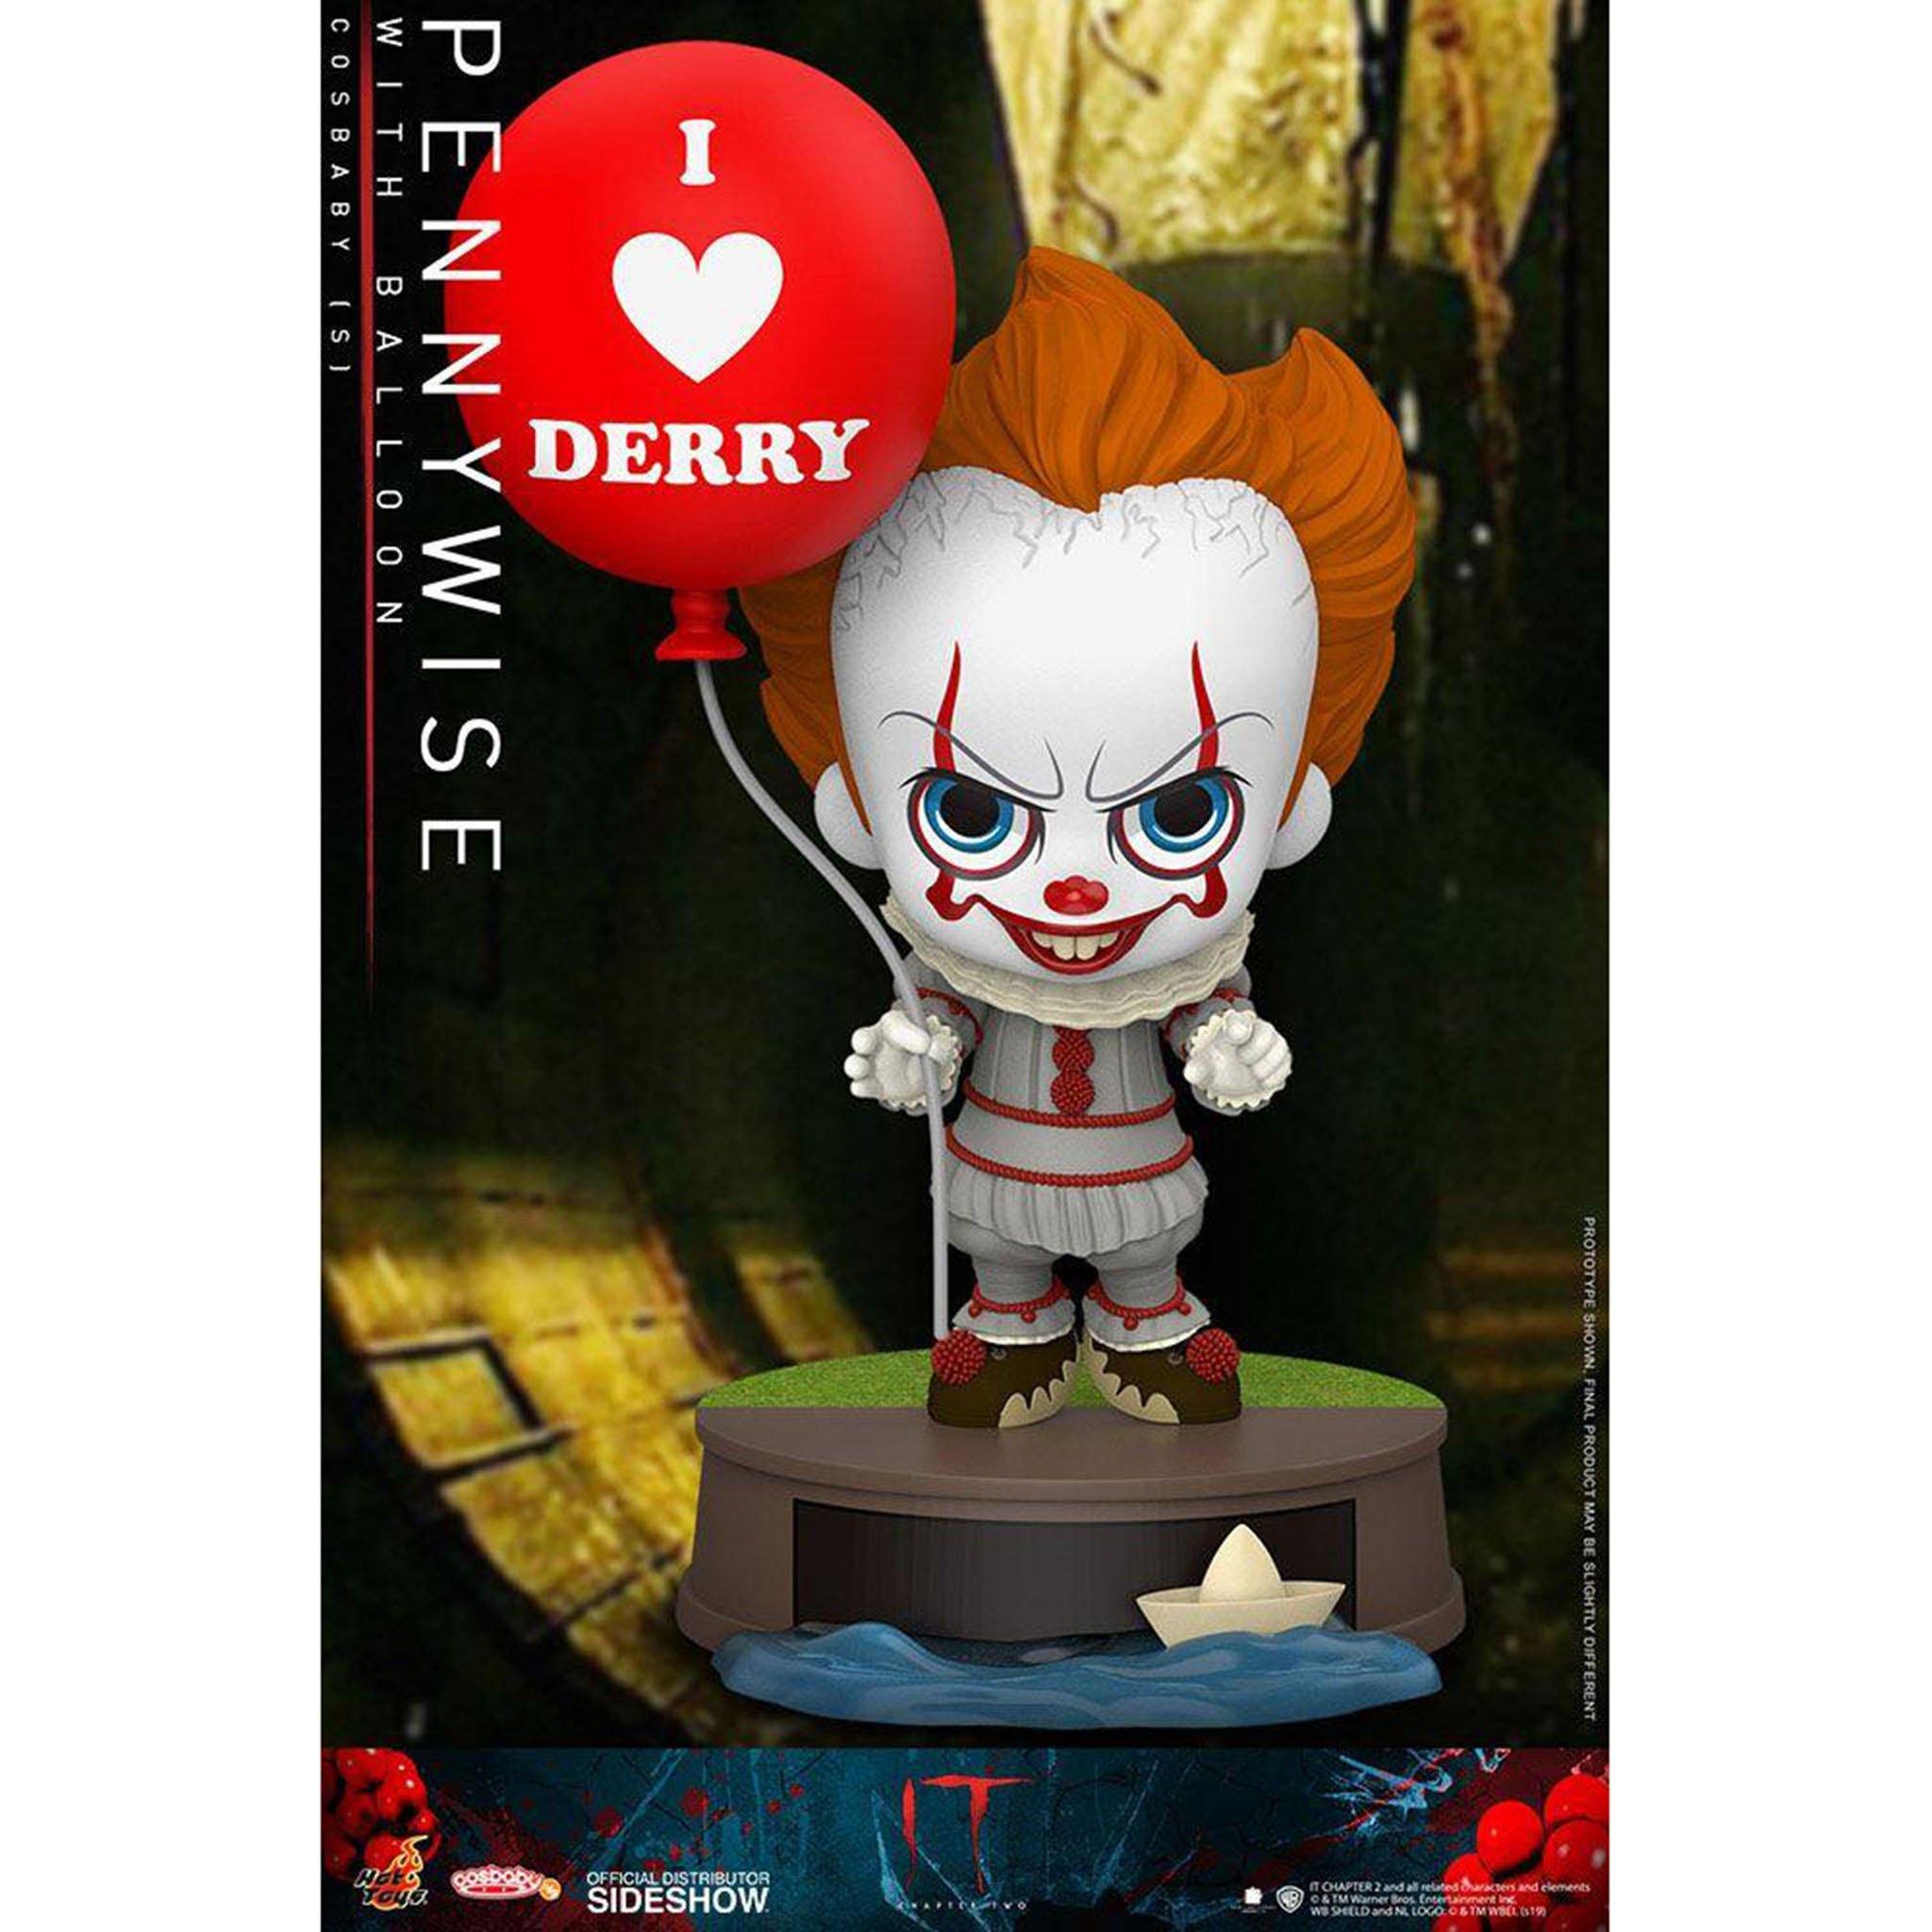 Hot Toys It Chapter Two Pennywise with Balloon Cosbaby Mini Figure - NEXTLEVELUK